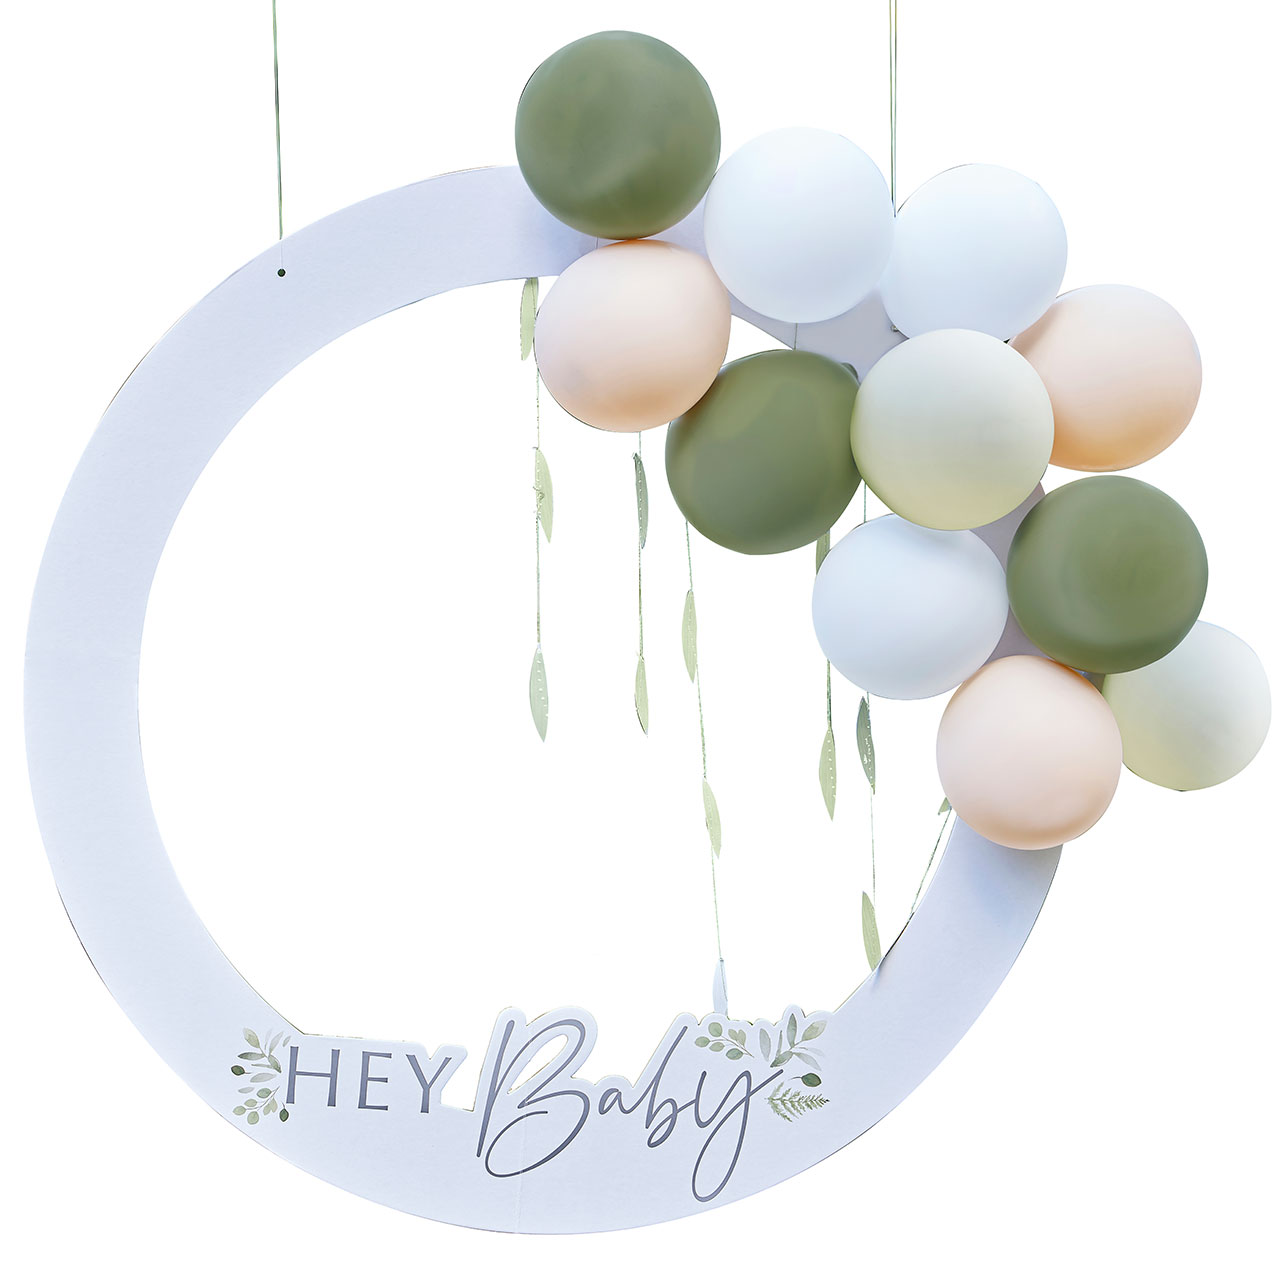 Photo Booth - Hey Baby 